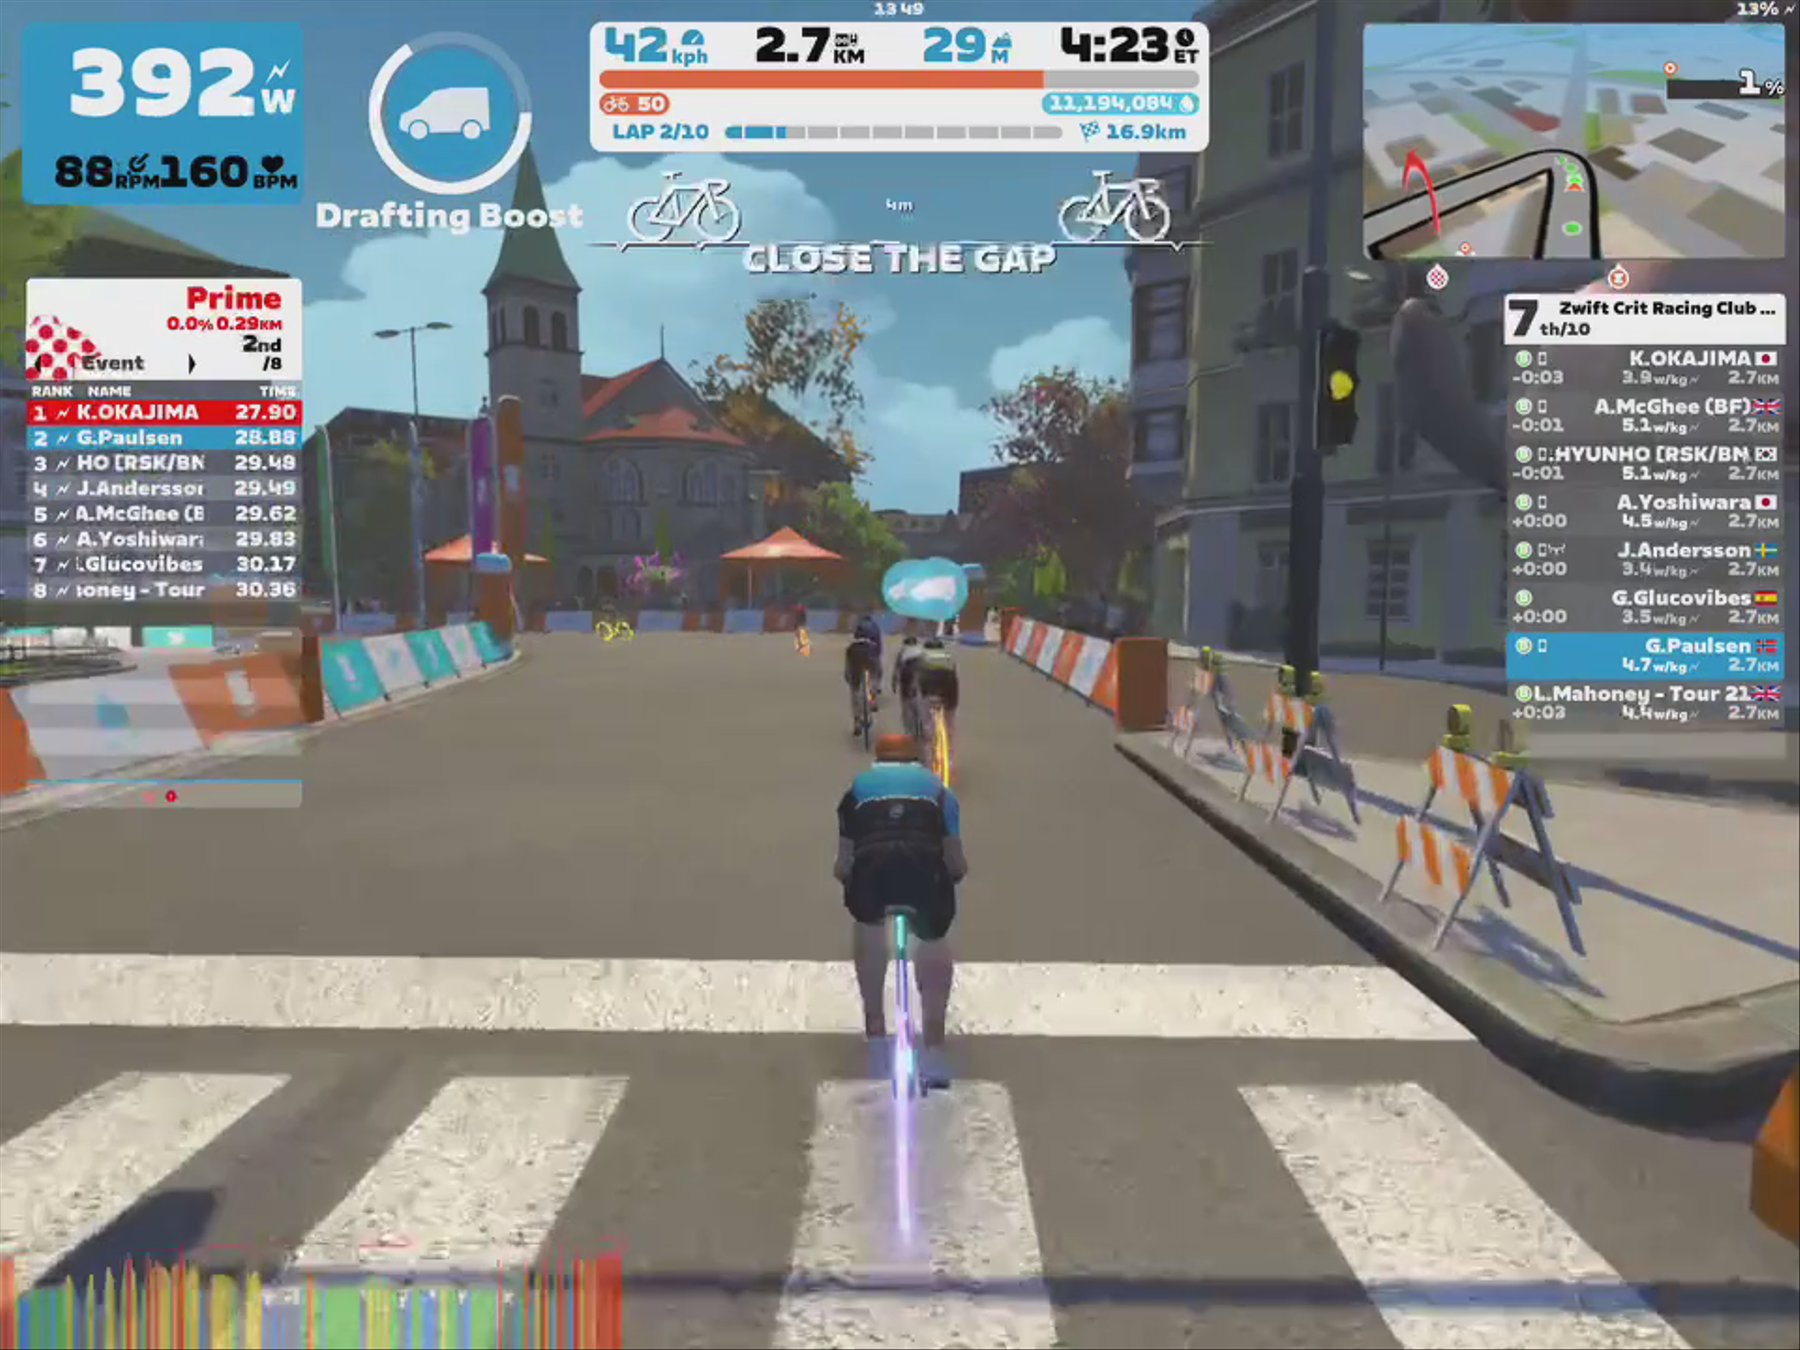 Zwift - Race: Zwift Crit Racing Club - The Bell Lap (B) on The Bell Lap in Crit City